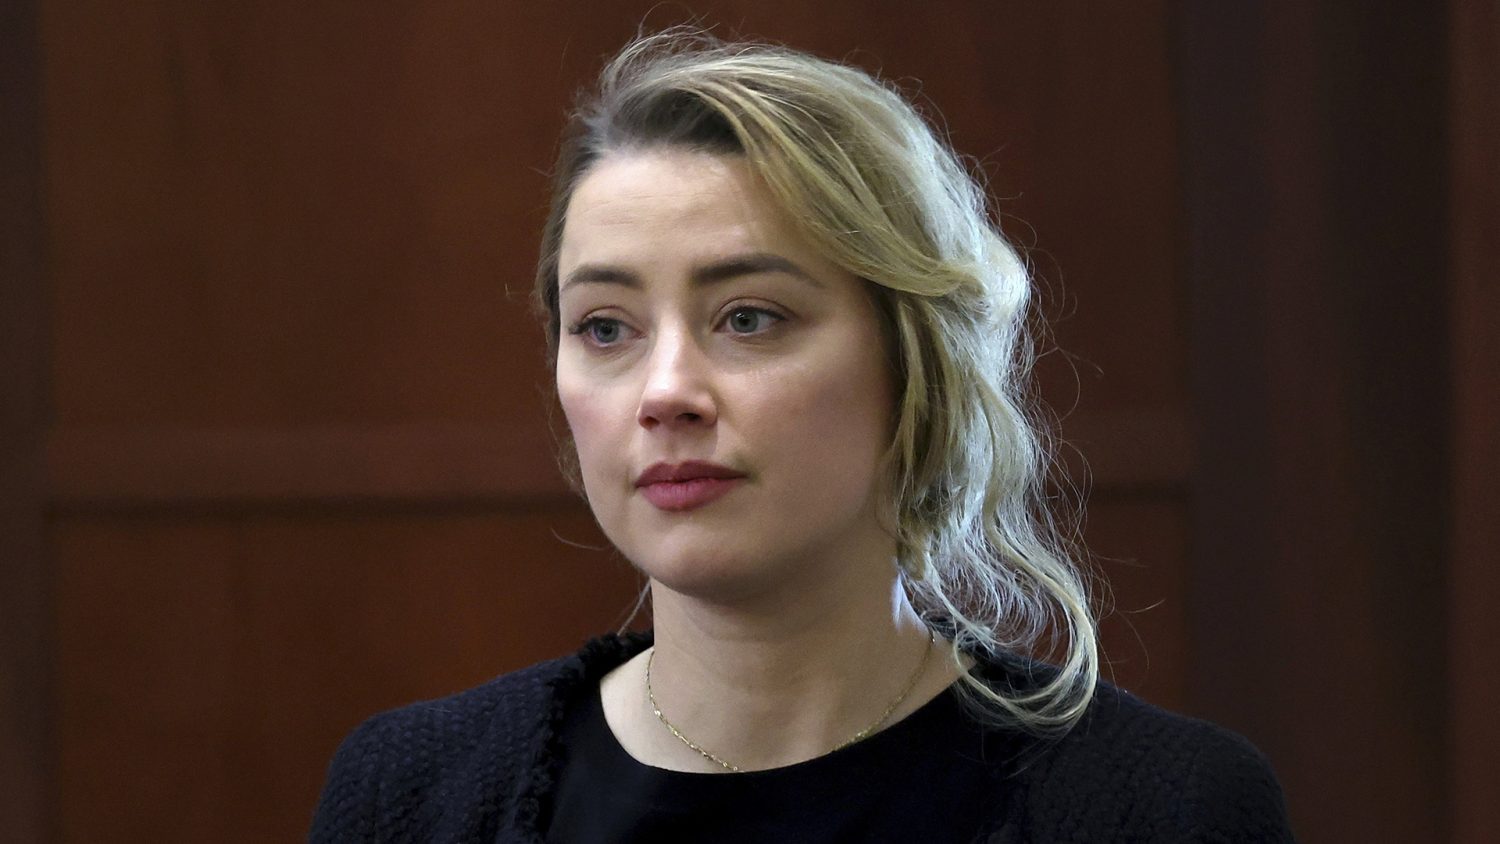 Amber Heard Has A Bloody Lip Picture And The Judge Just Threw It Out